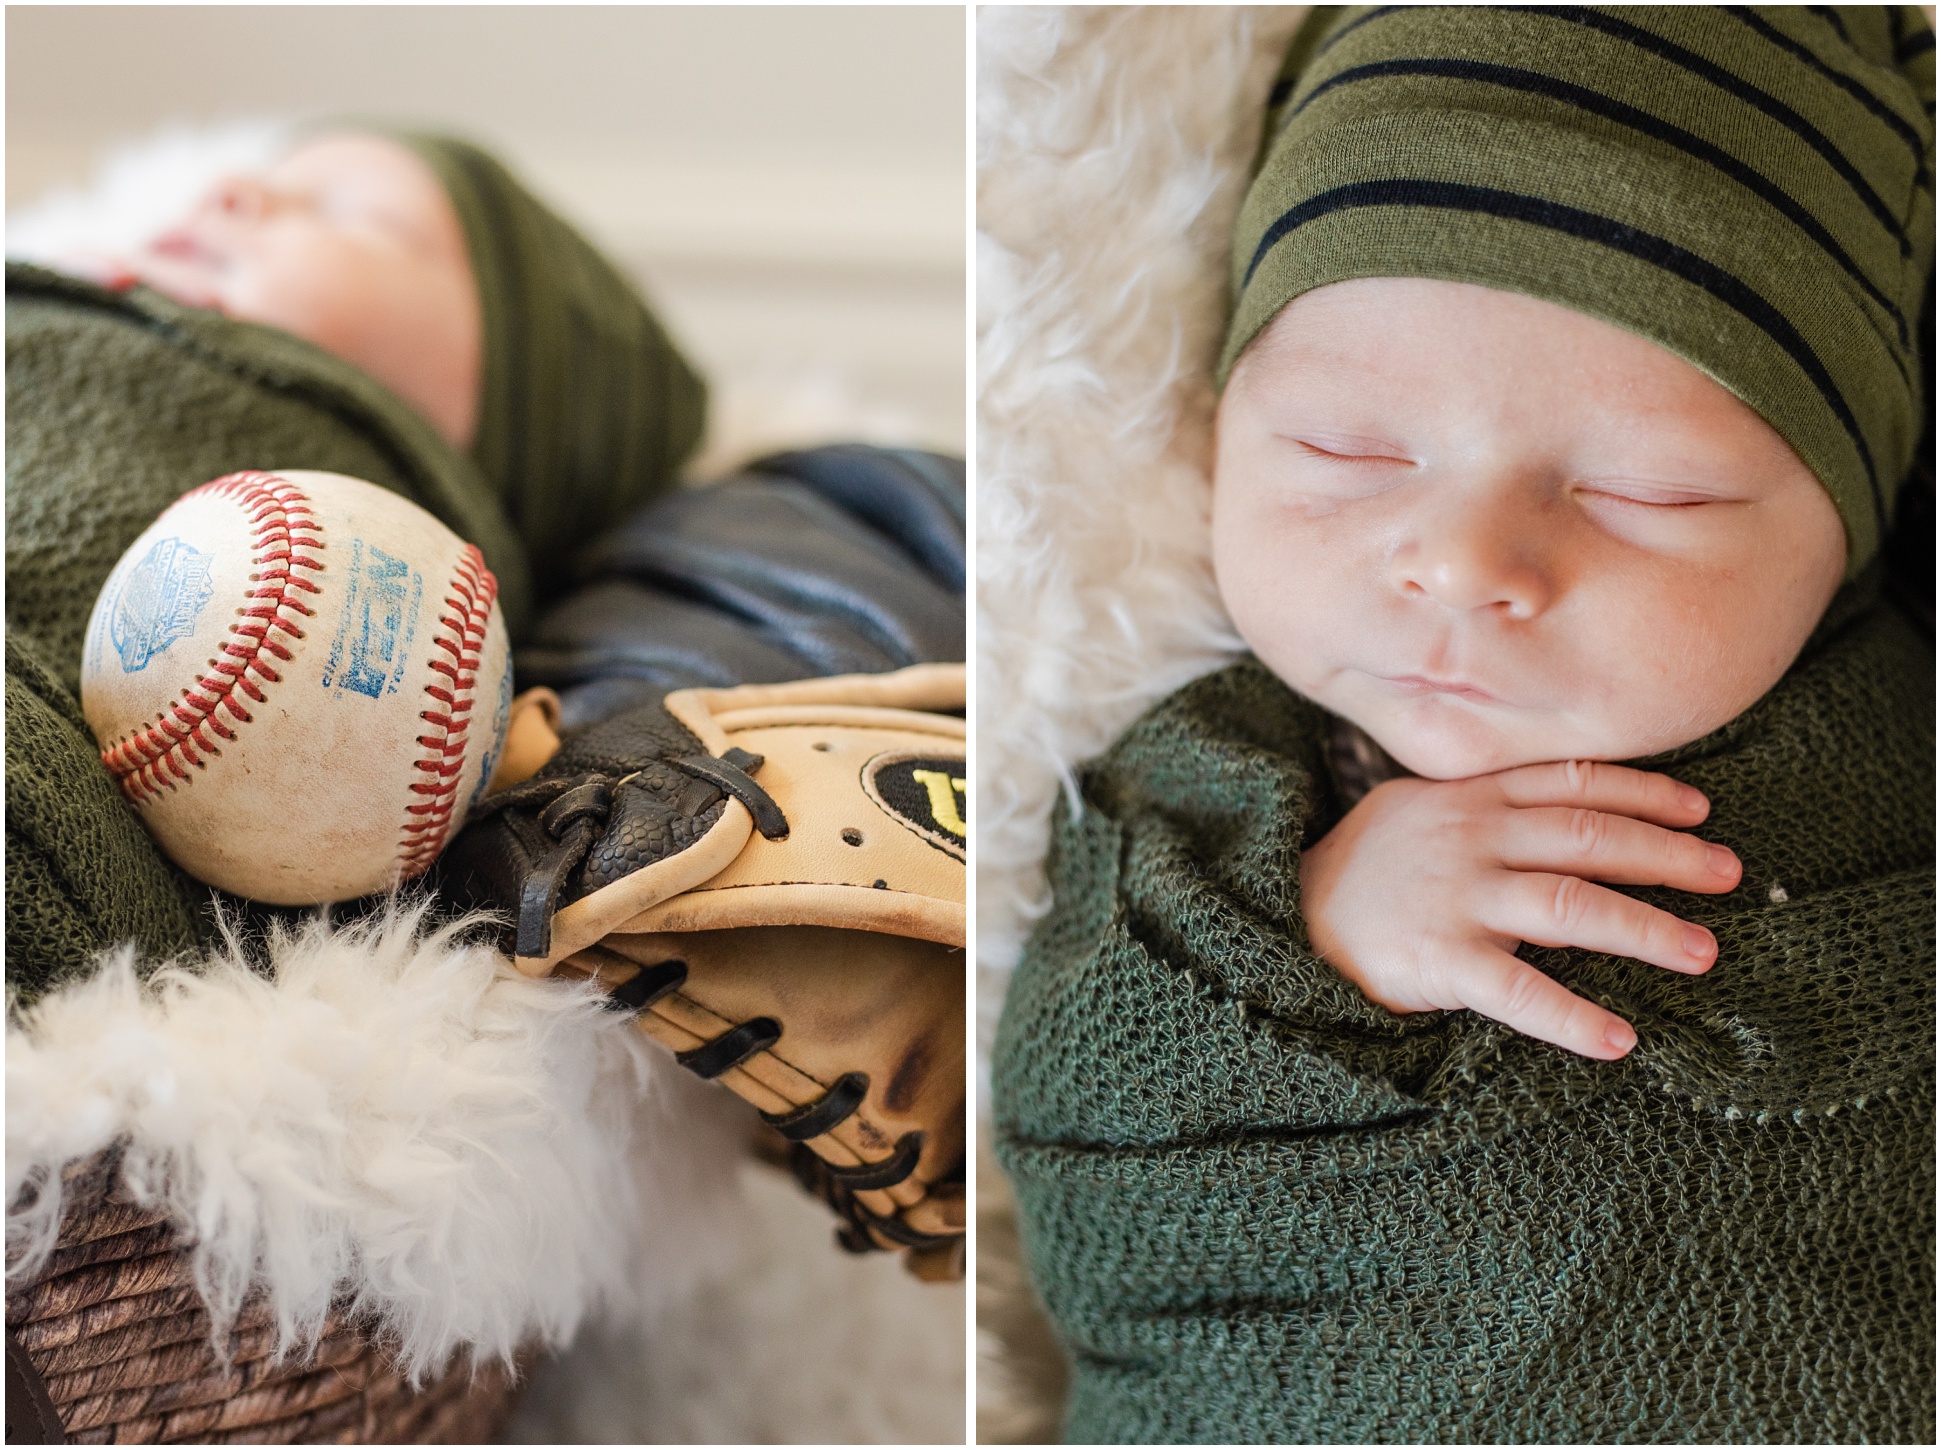 baseball glove and baseball in focus with baby in the background; above view of baby sleeping in green swaddle